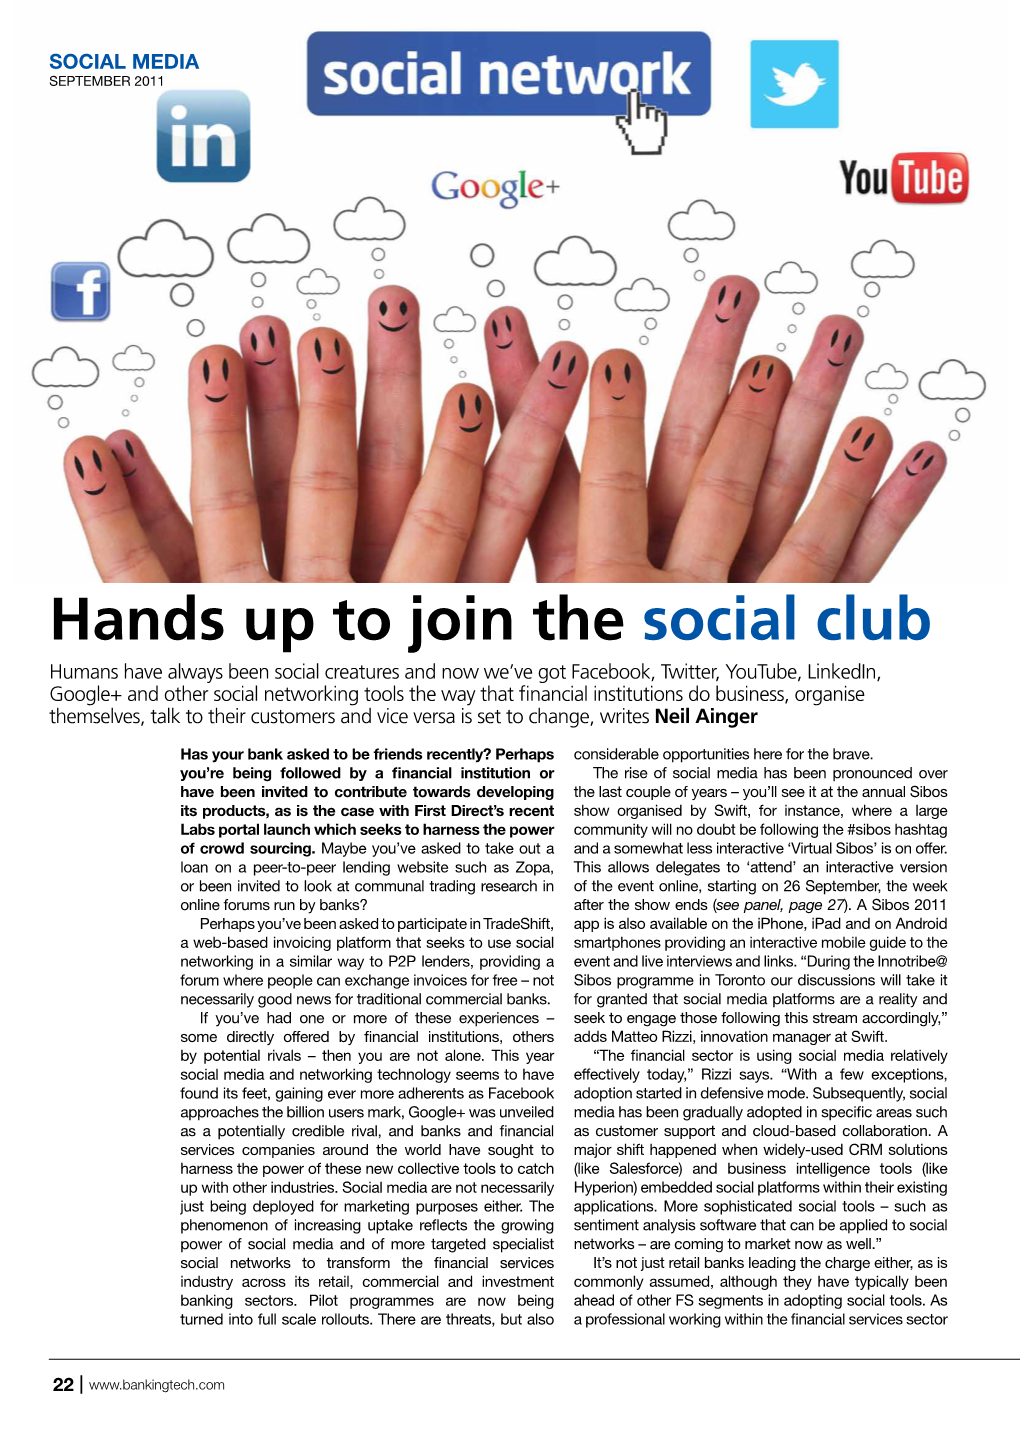 Hands up to Join the Social Club